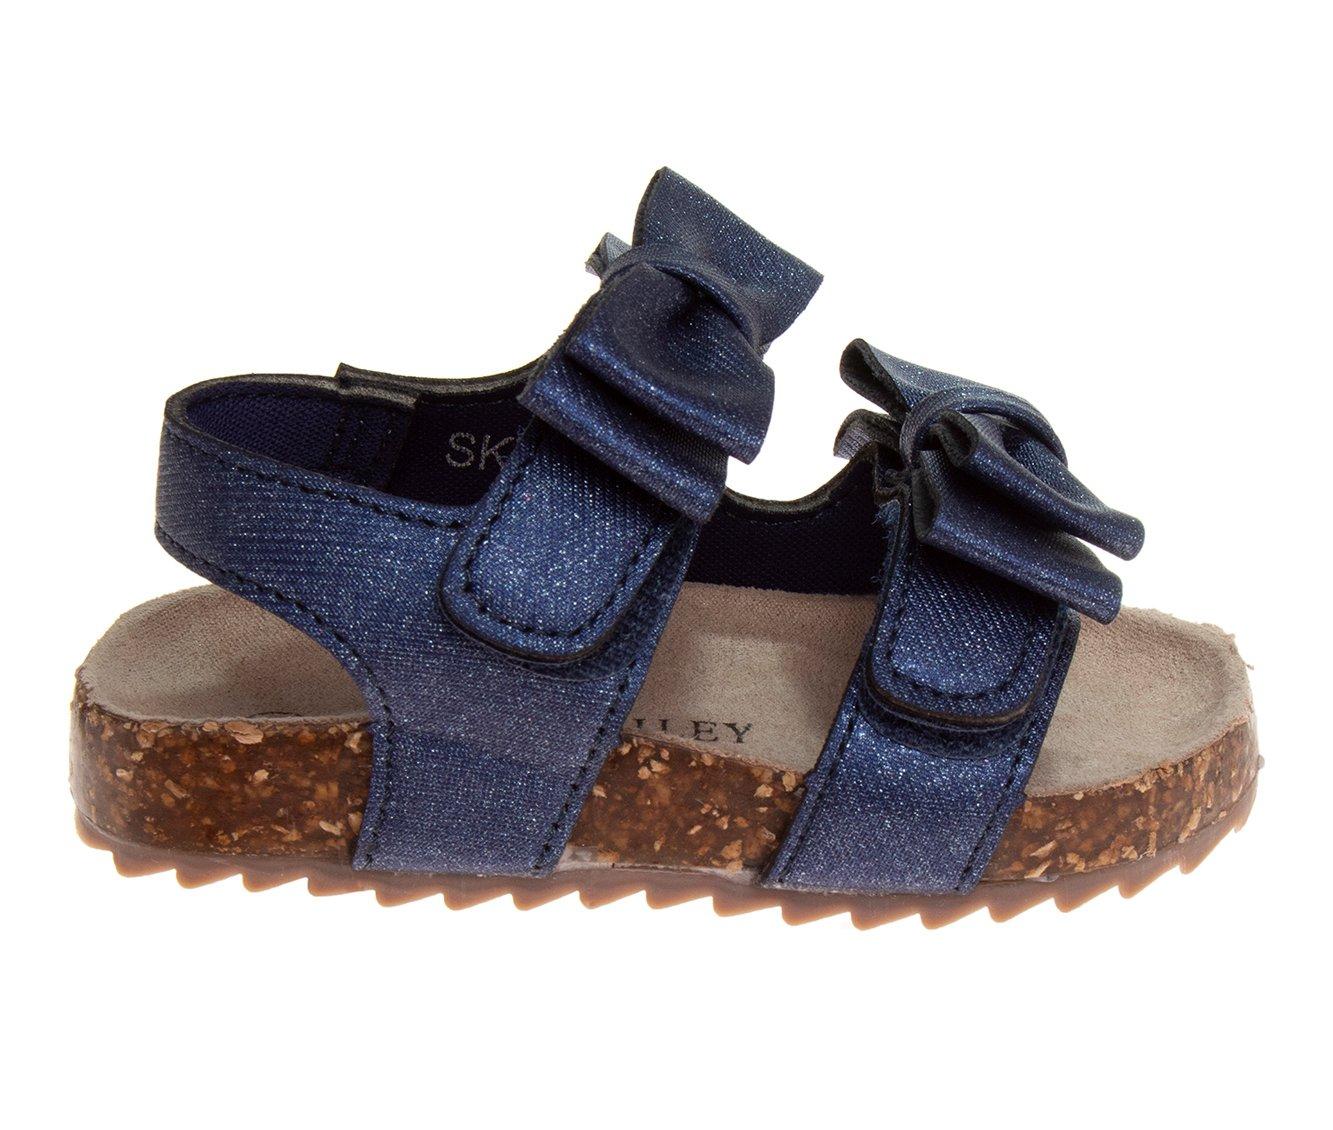 Girls' Laura Ashley Toddler Lacy Bow Sandals